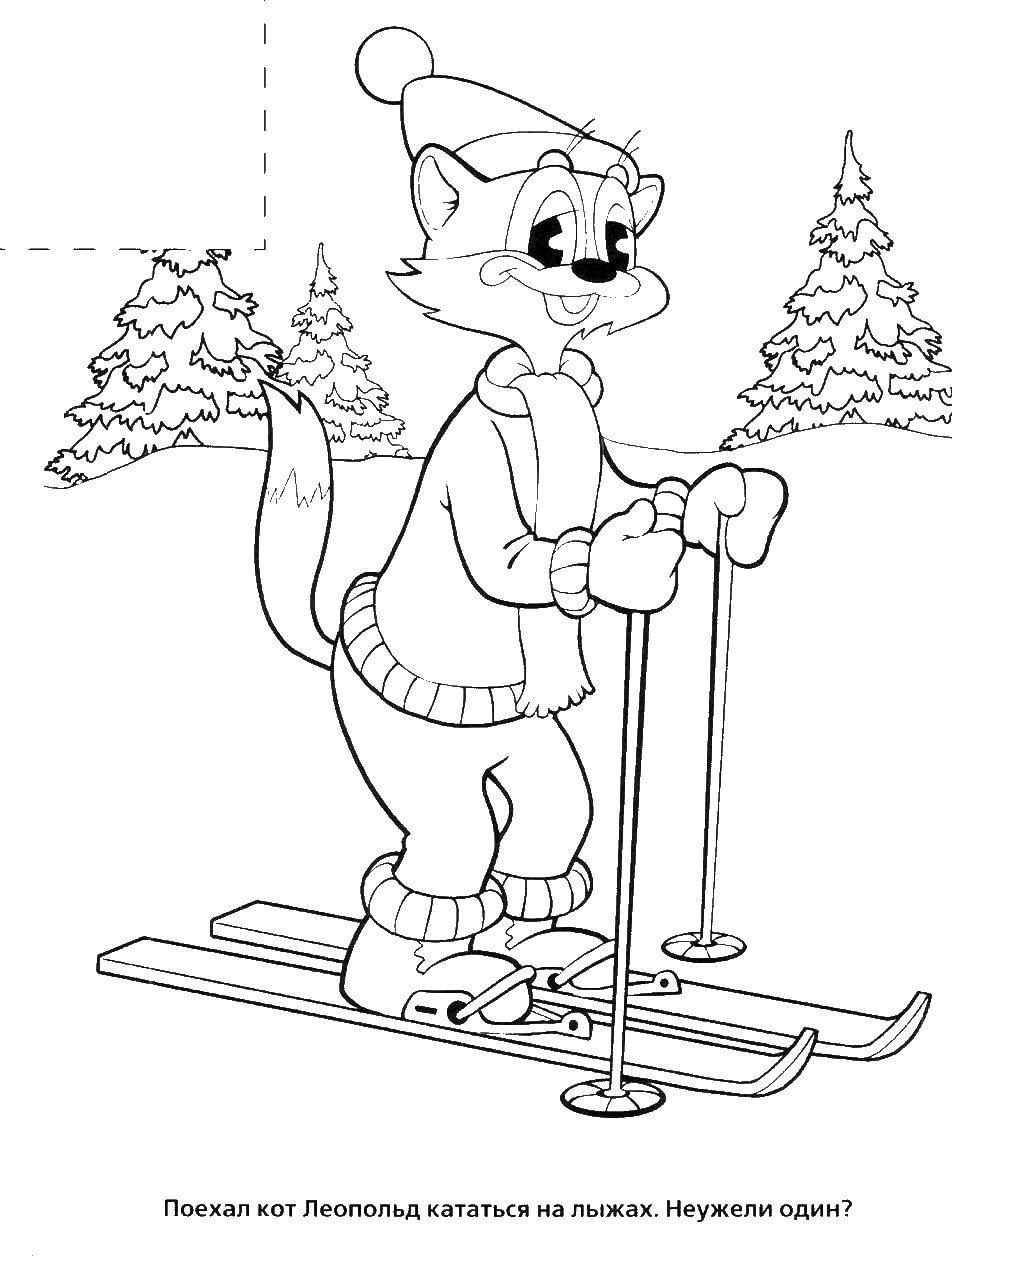 Coloring Leopold the cat skiing. Category coloring cat Leopold. Tags:  The cat, Leopold.